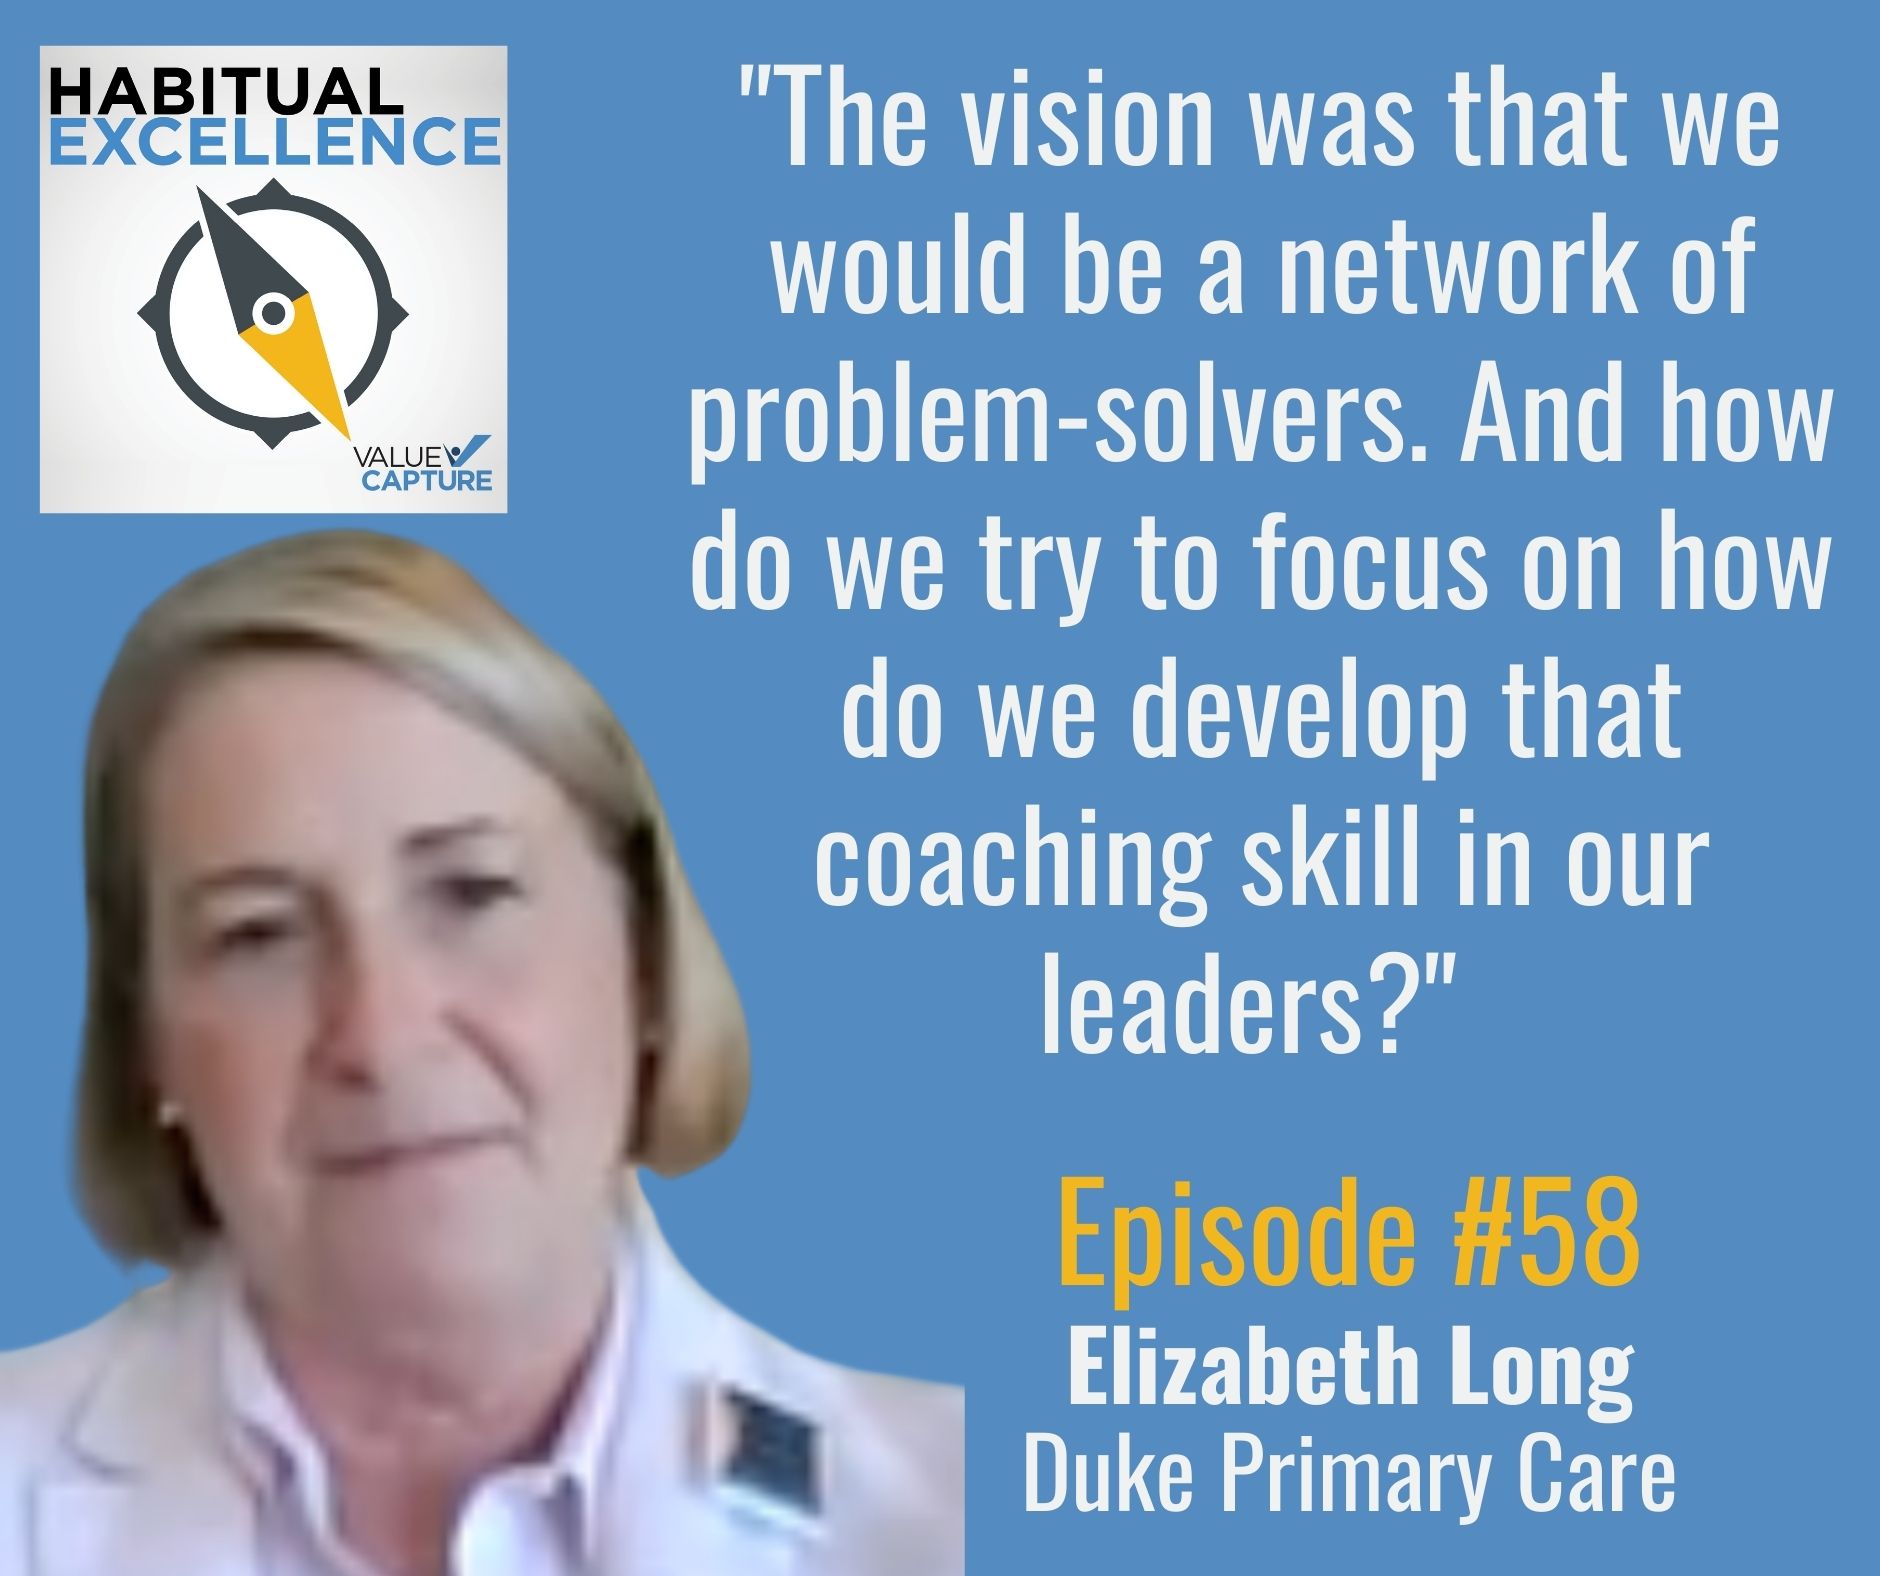 "The vision was that we would be a network of problem-solvers. And how do we try to focus on how do we develop that coaching skill in our leaders?" 